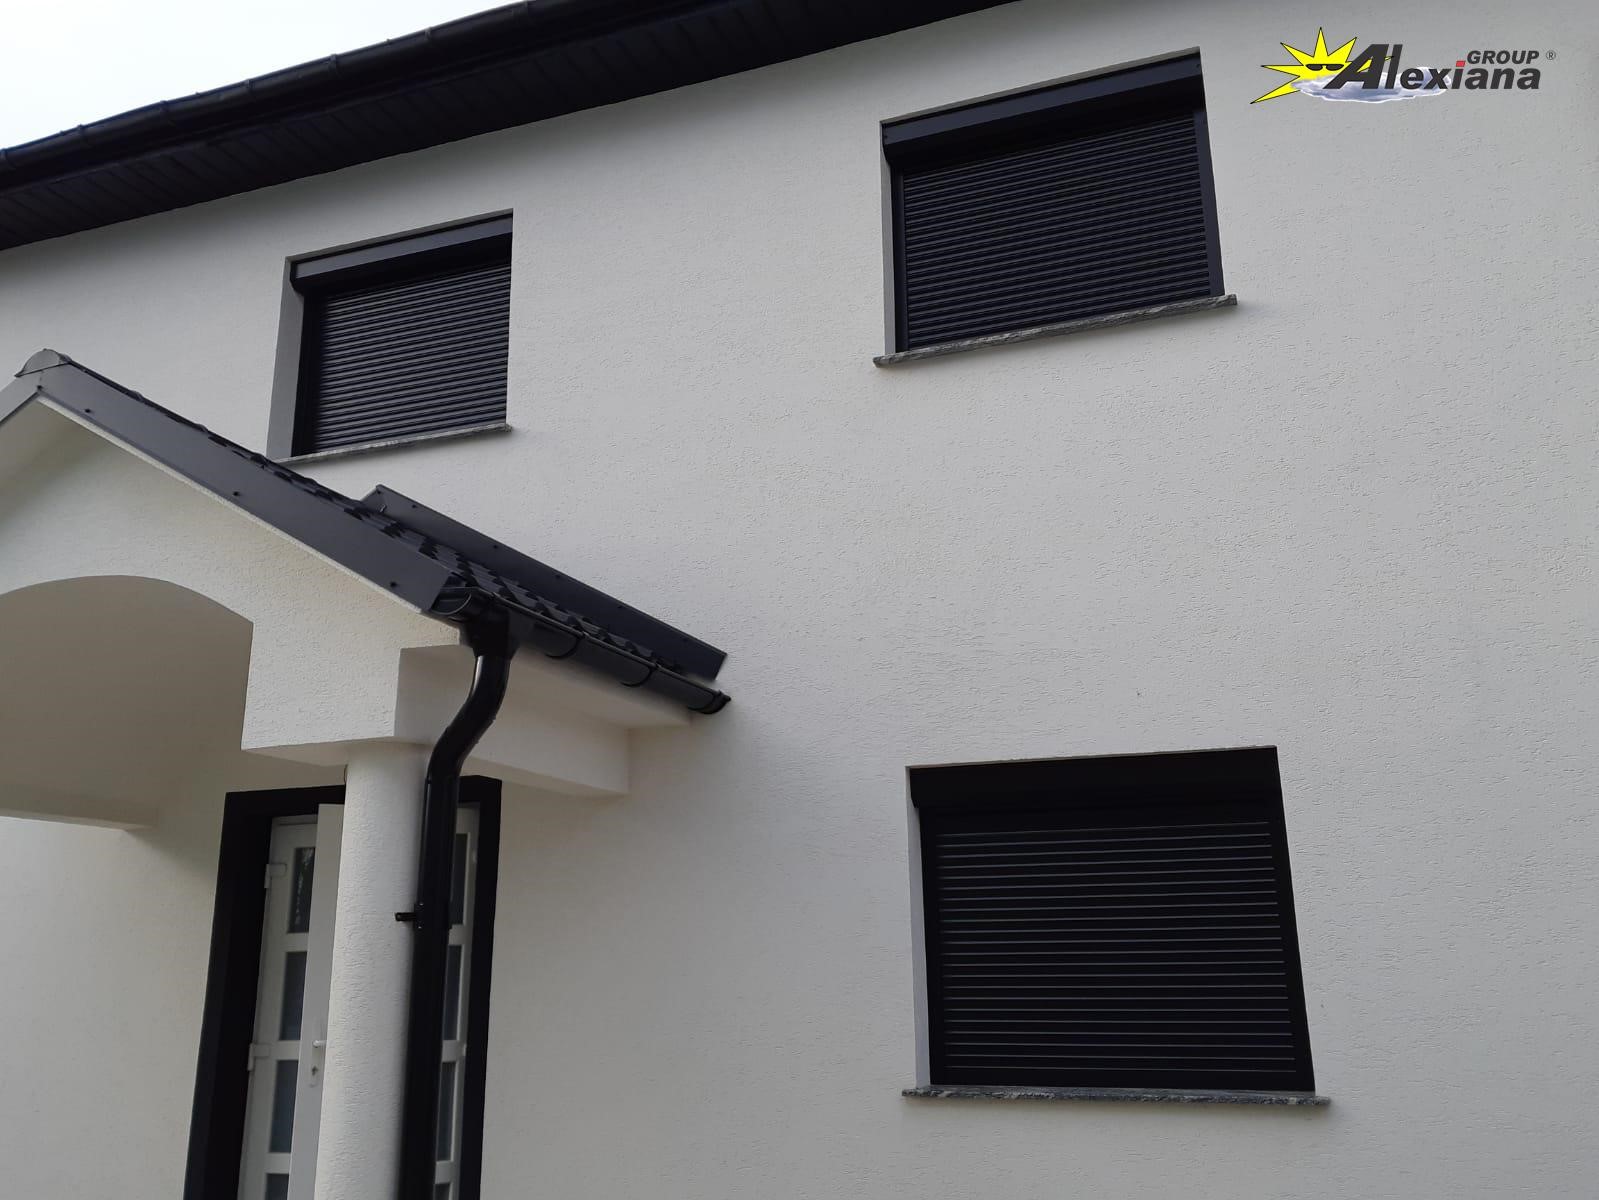 What problems of the outer roller shutters are covered by warranties?